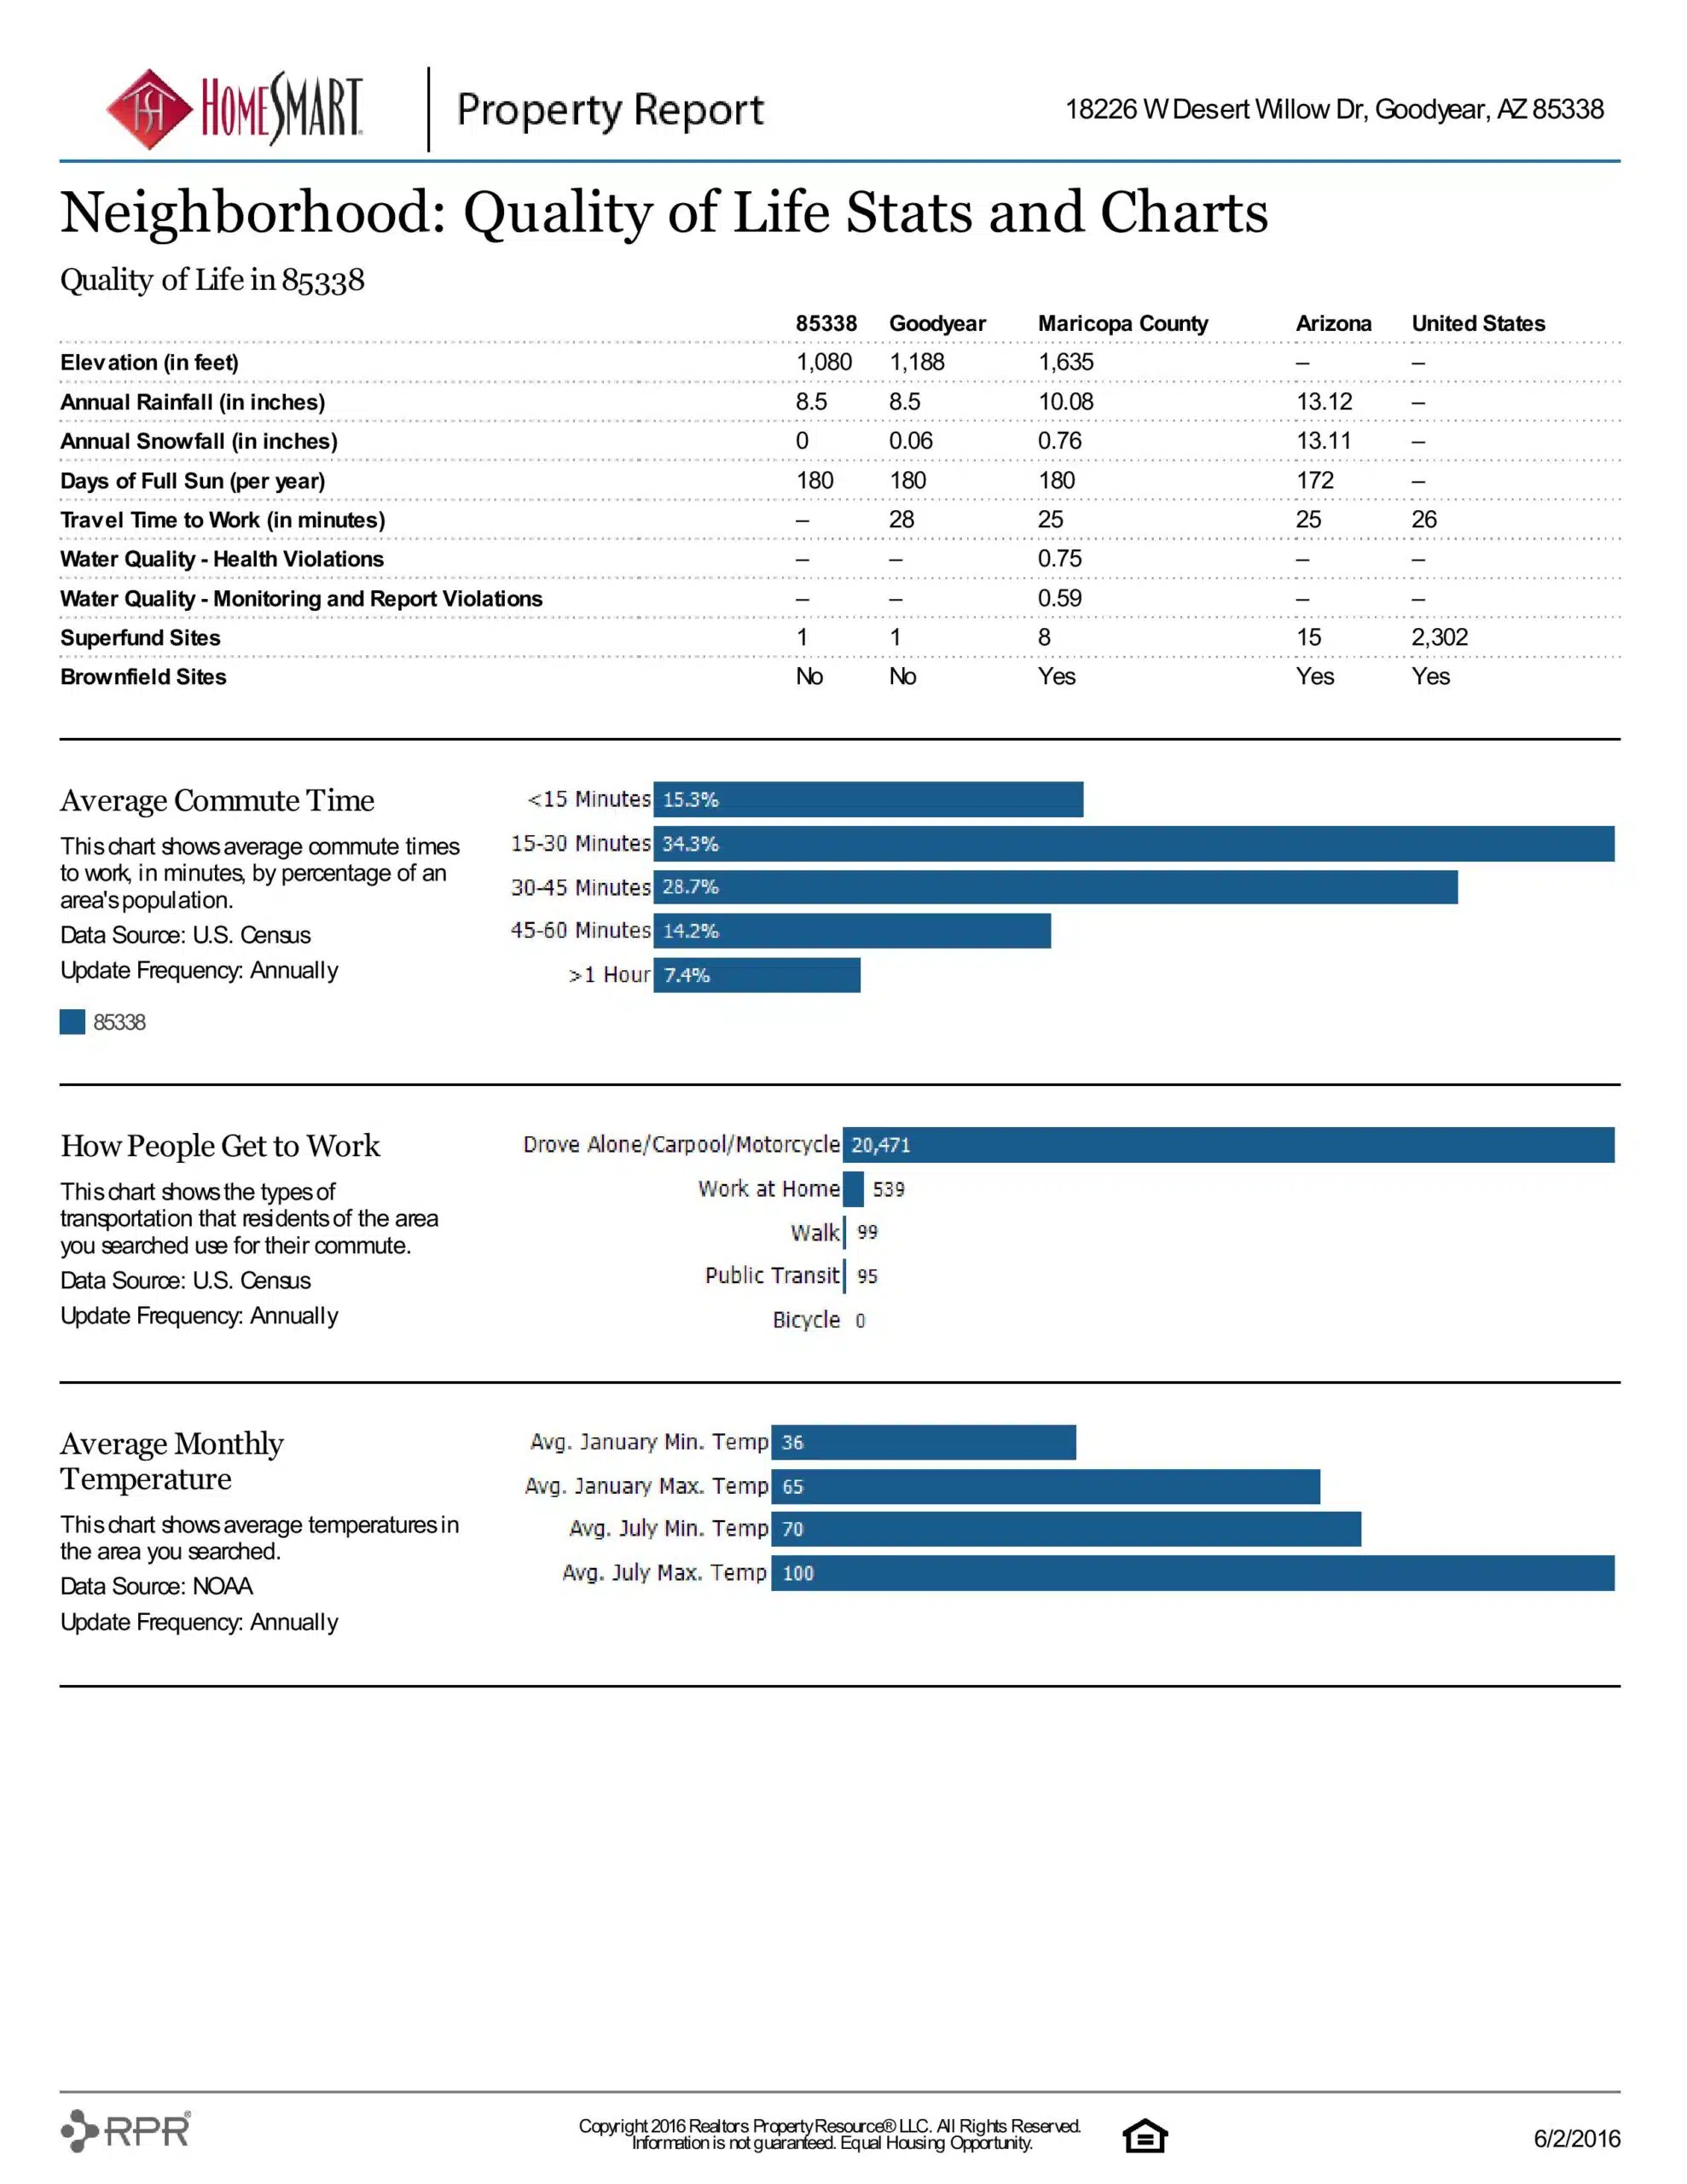 18226 W DESERT WILLOW DR PROPERTY REPORT-page-020